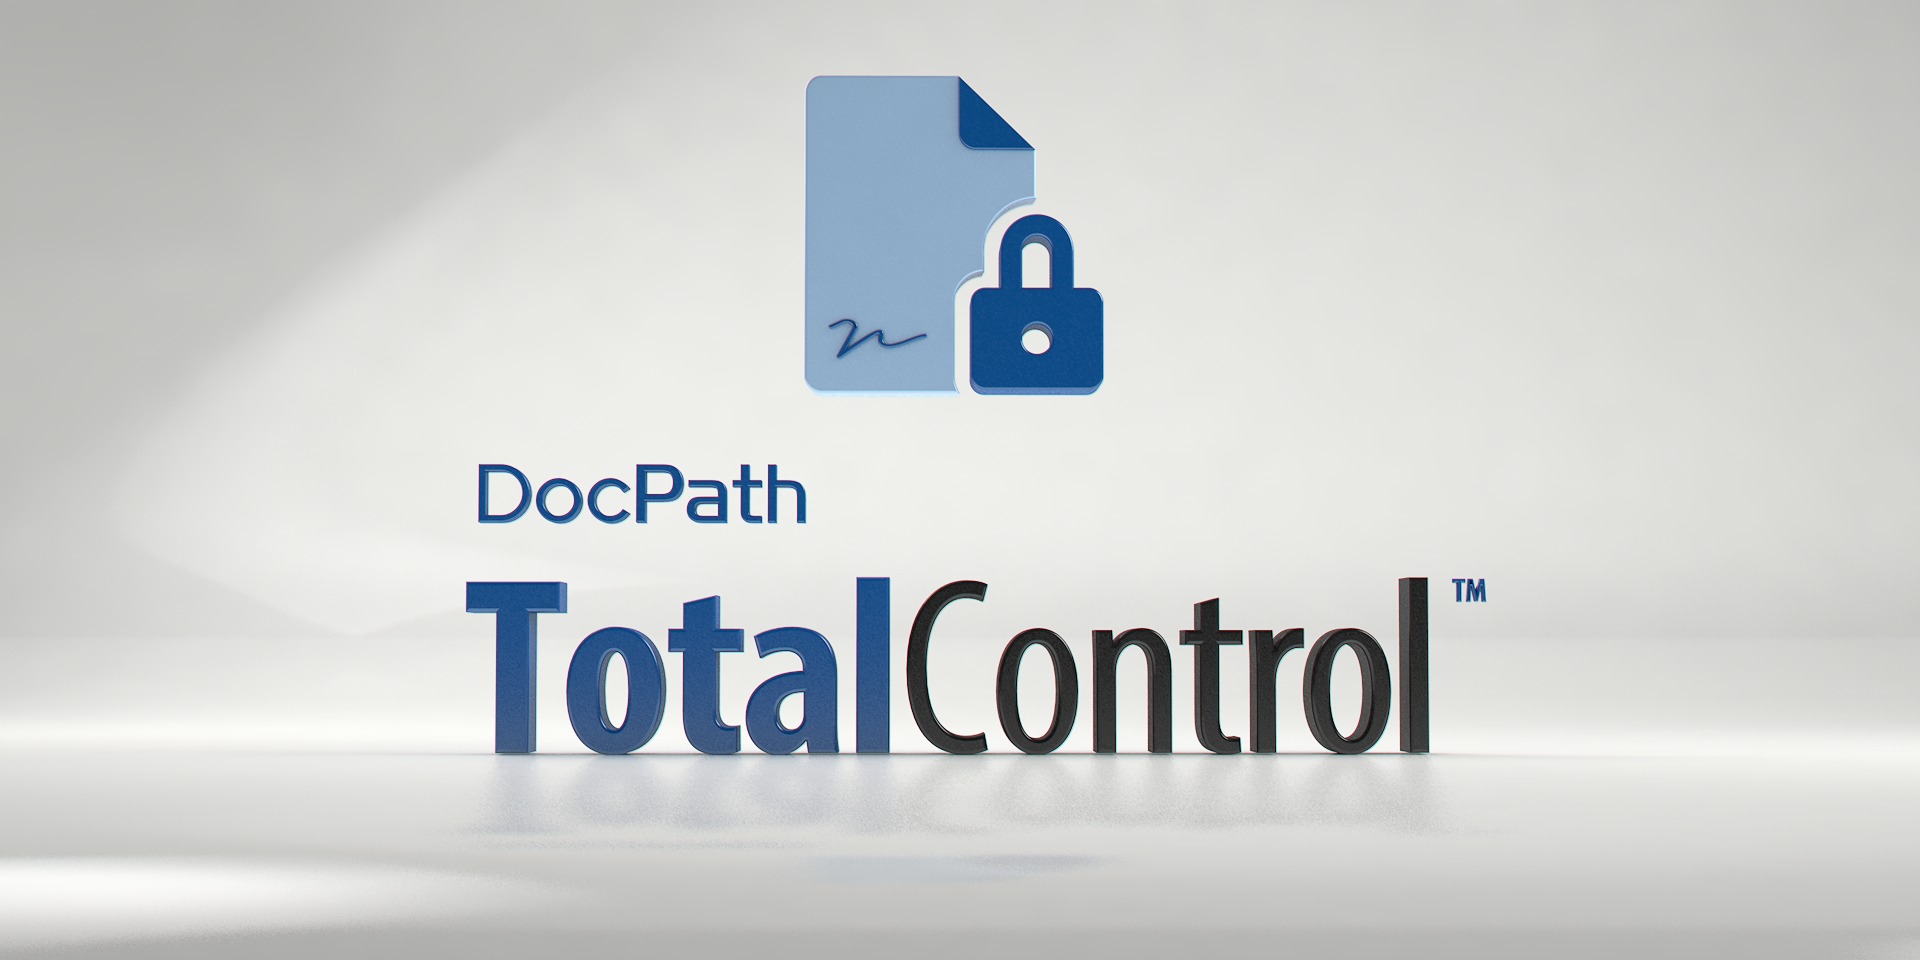 DocPath TotalControl provides insurance companies a document software solution for the easy and intuitive creation of dynamic forms and the total control of documents from design to distribution.